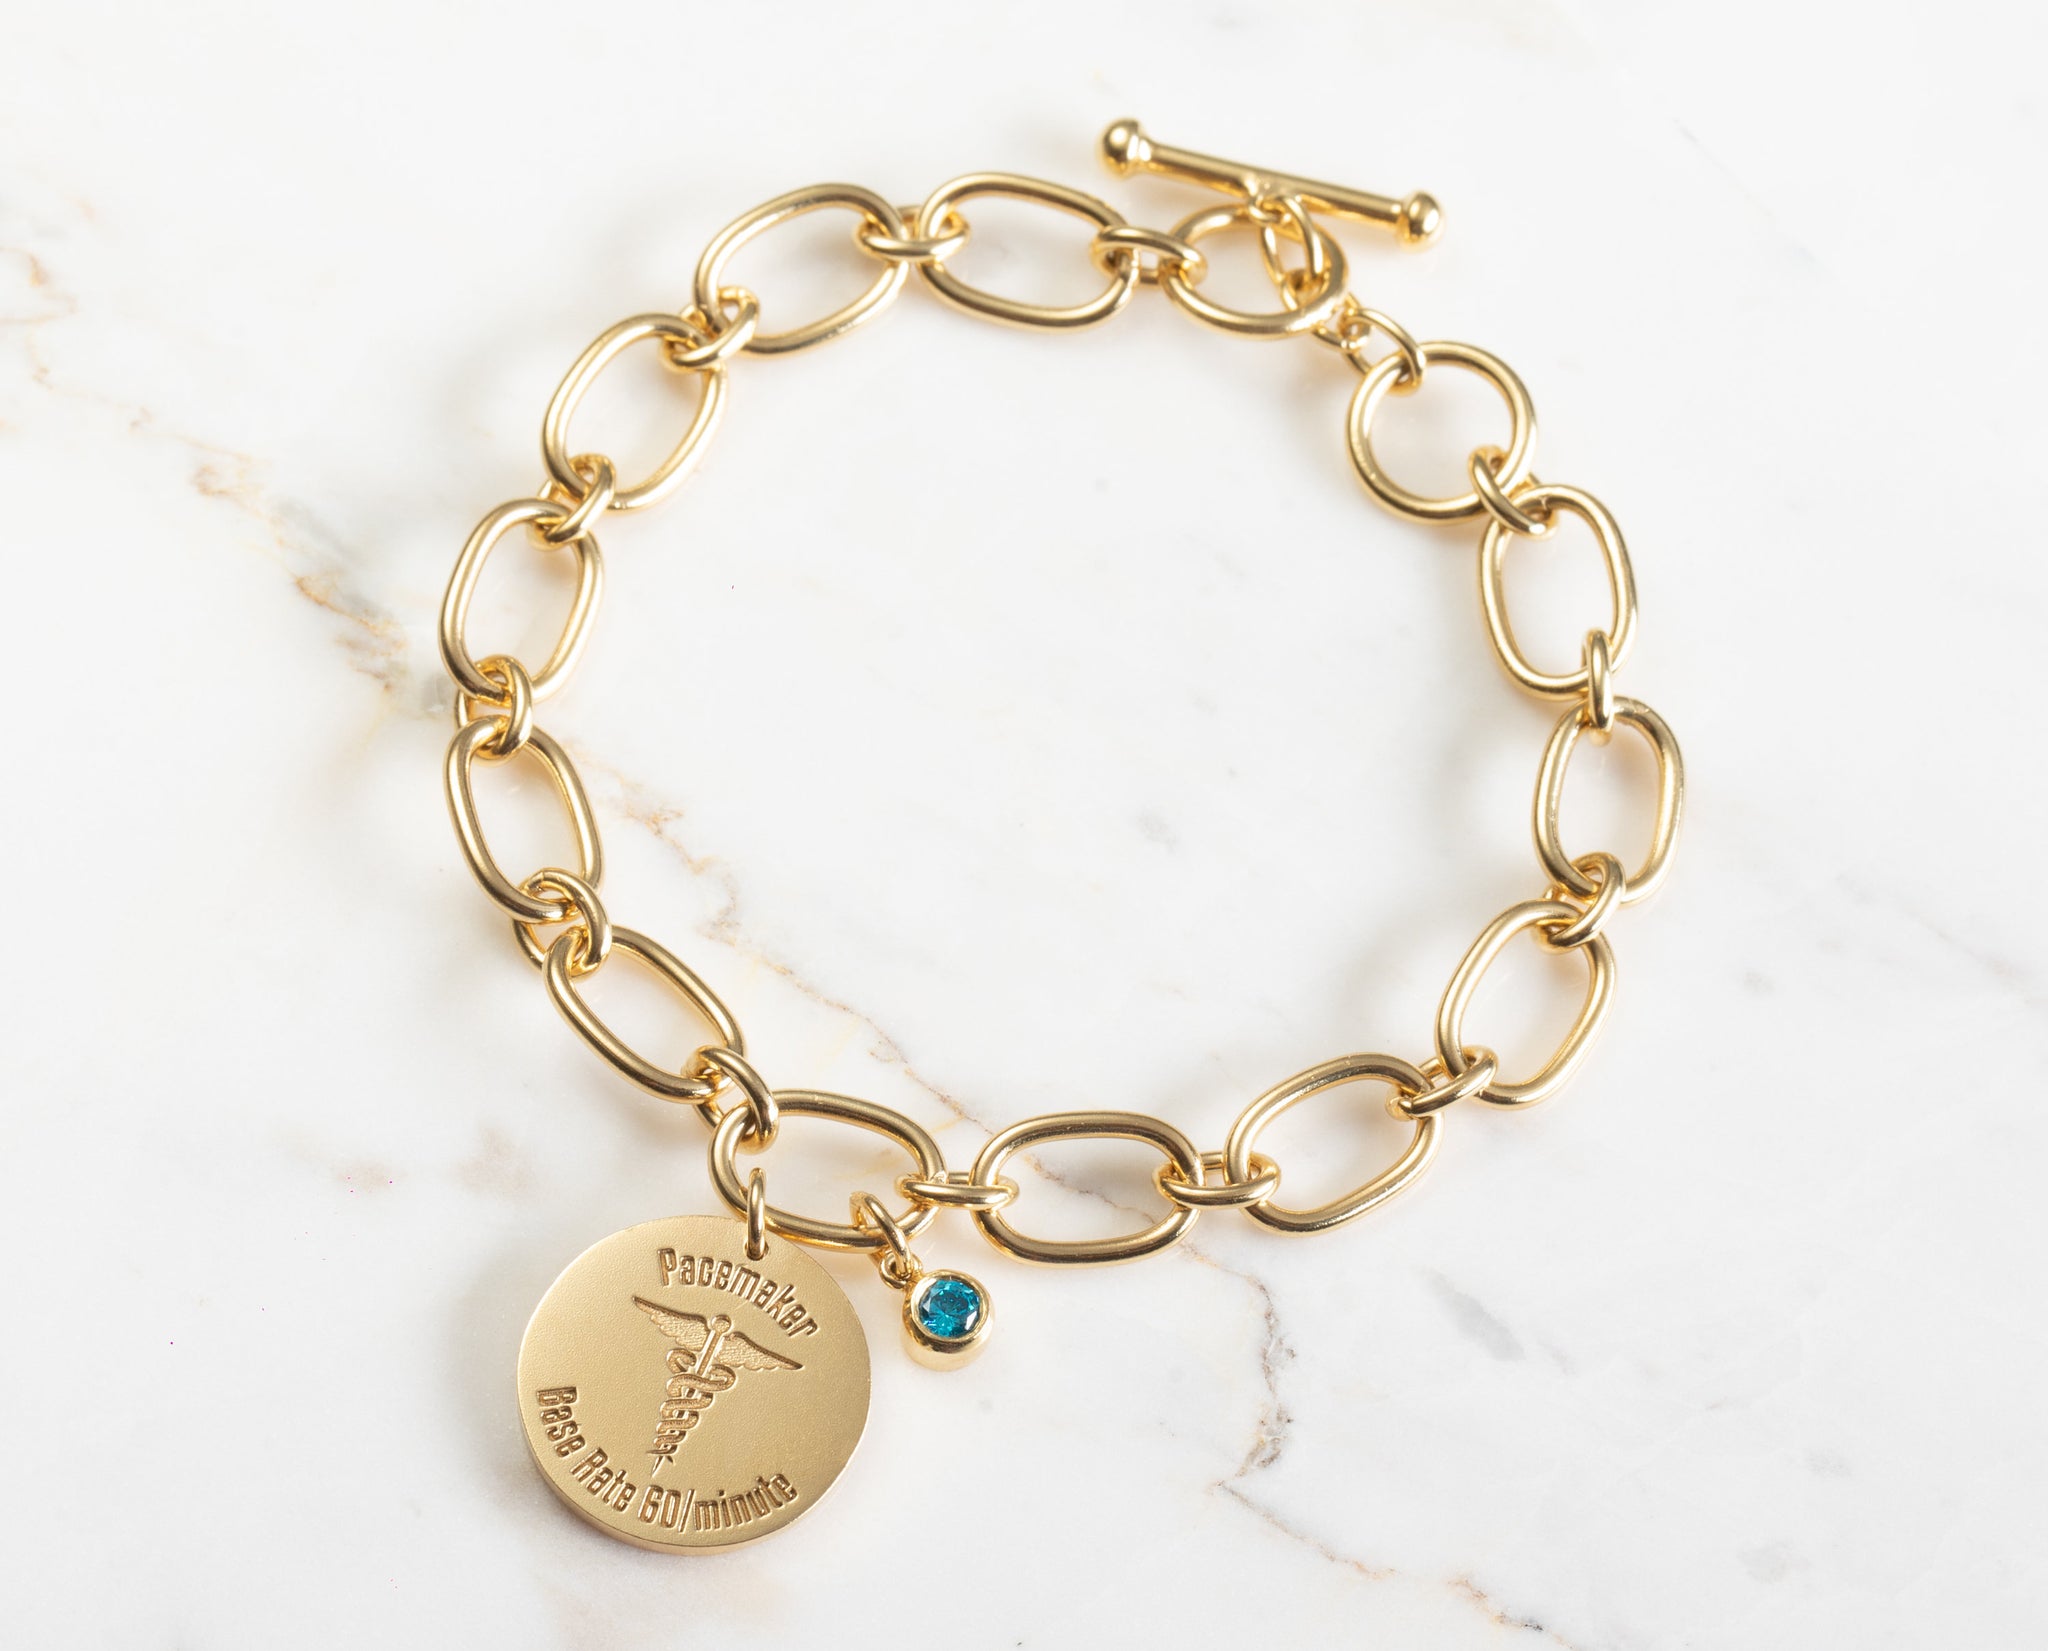 Medical ID Bracelet with multiple charms